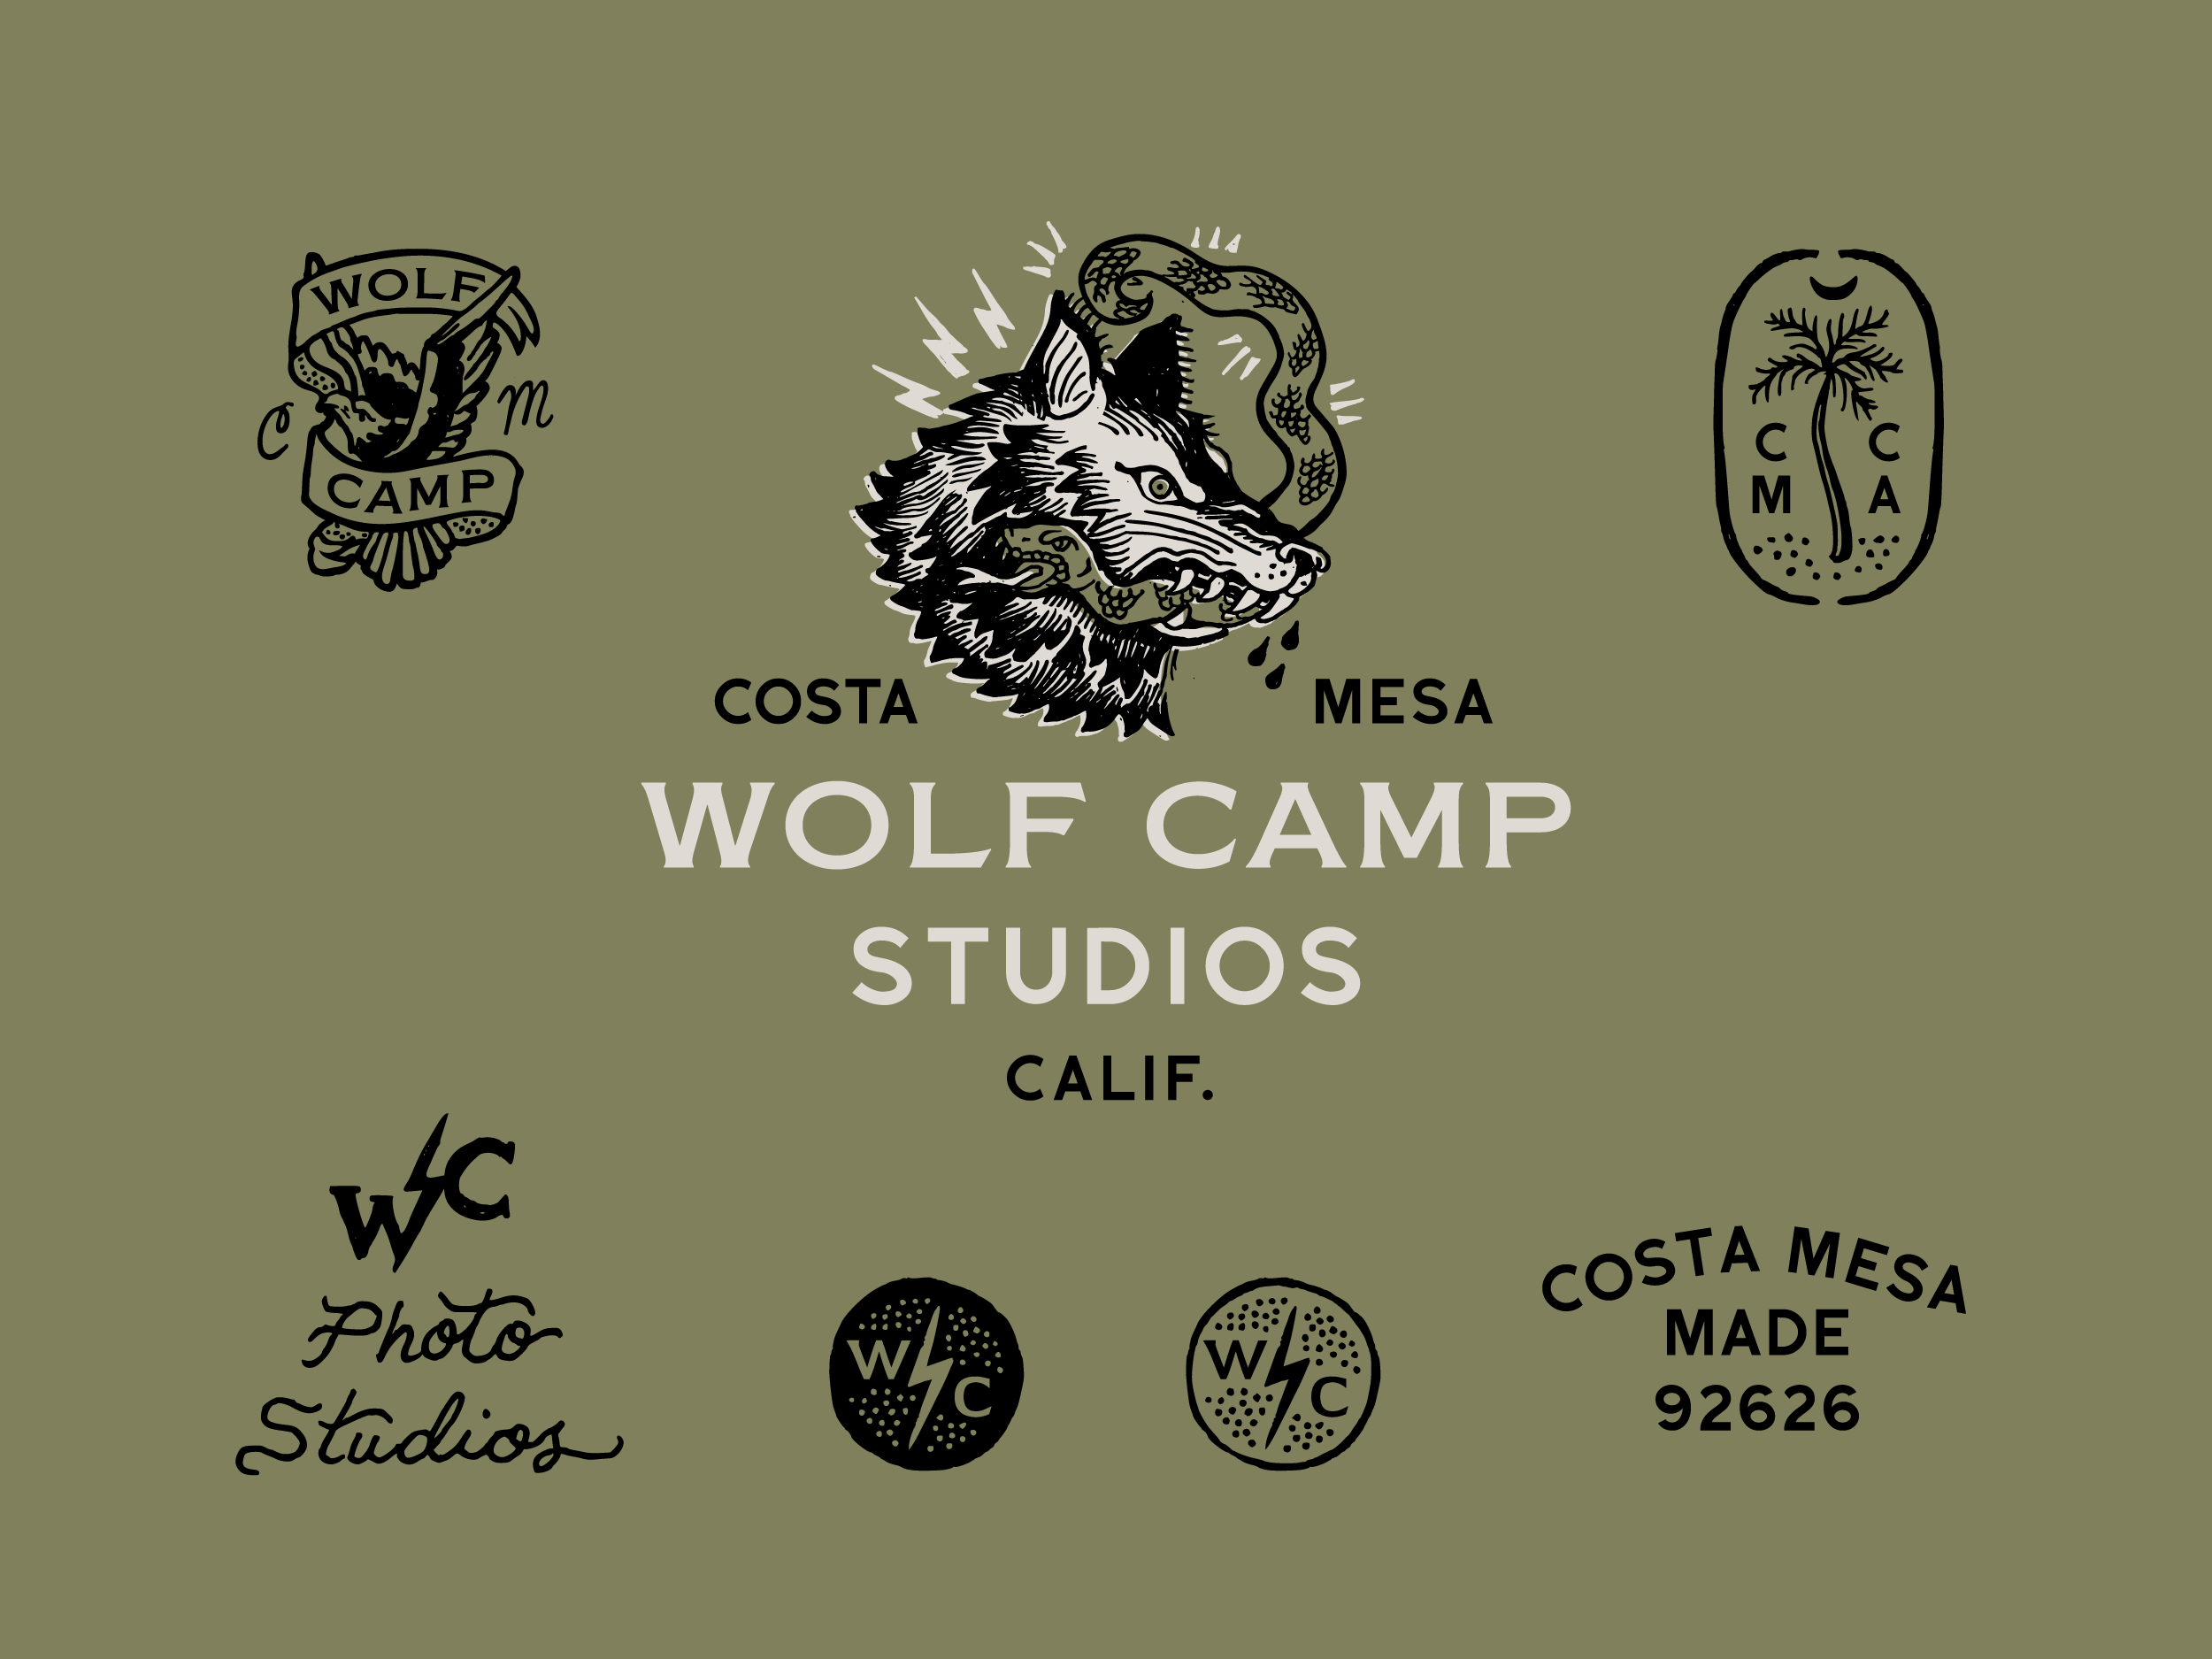 Wolf Camp logos in color